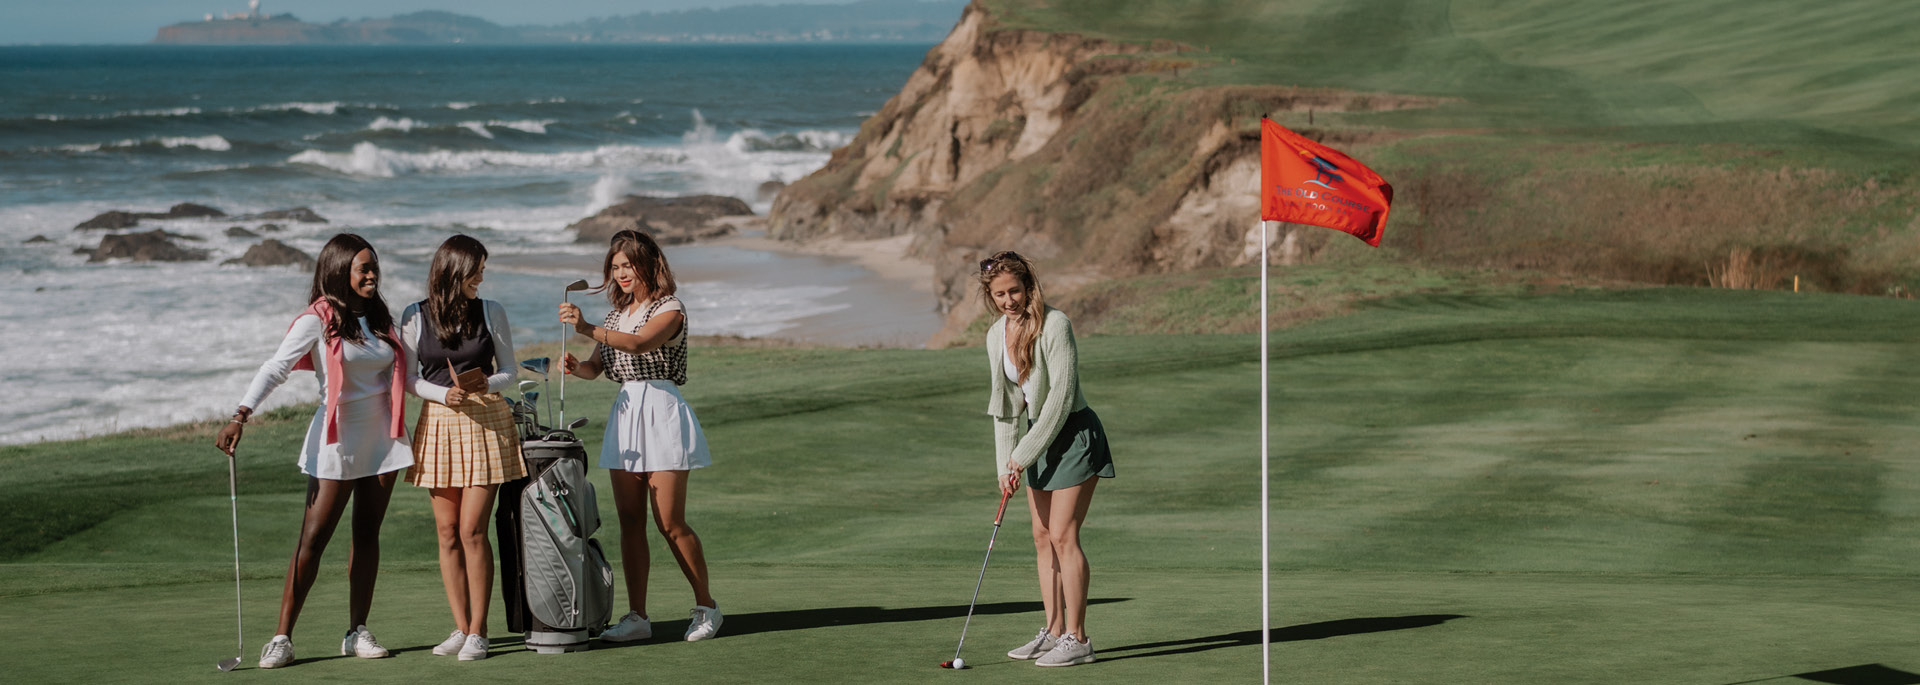 group of ladies putting at a golf course by the ocean